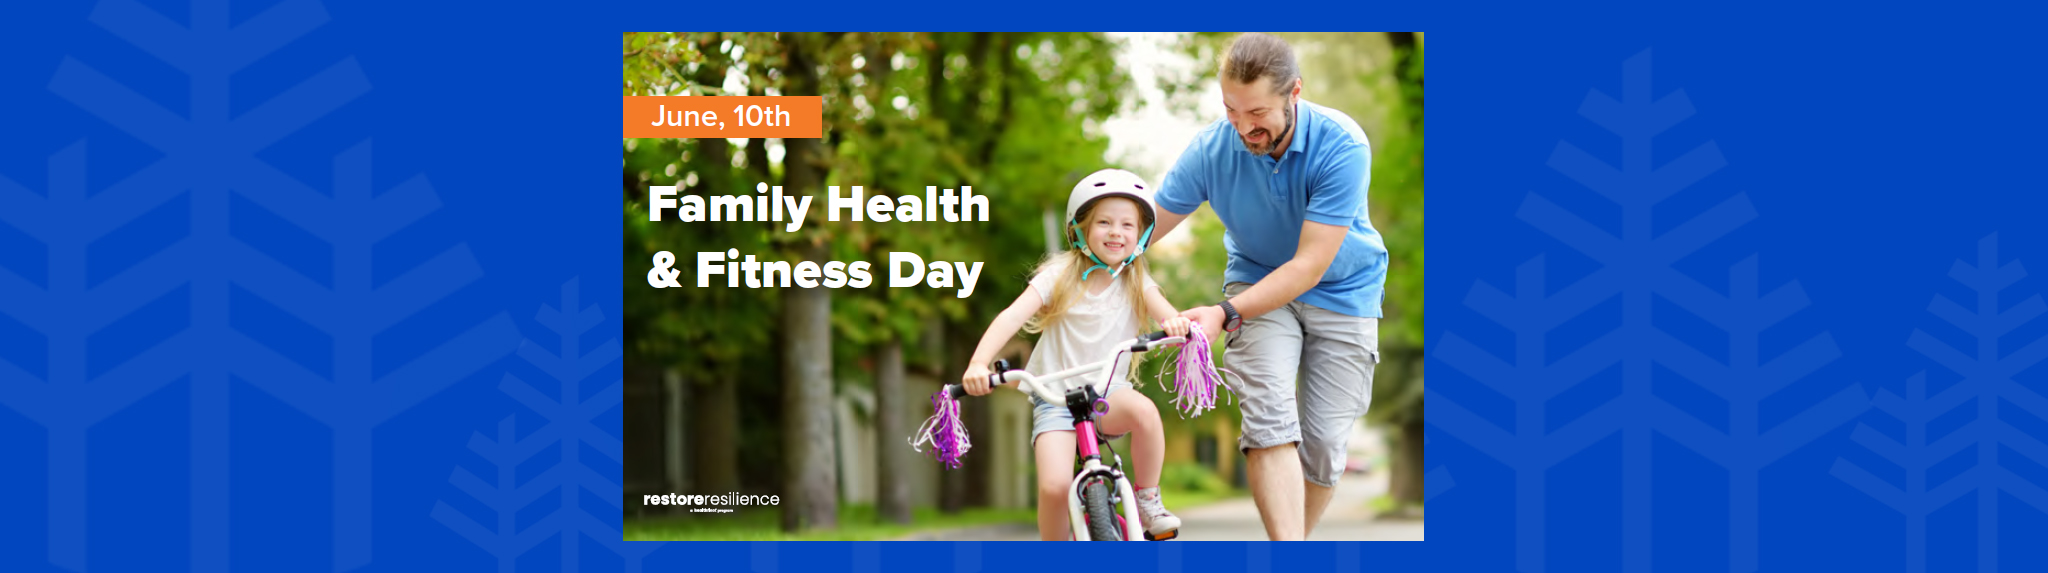 Family Health + Fitness Day